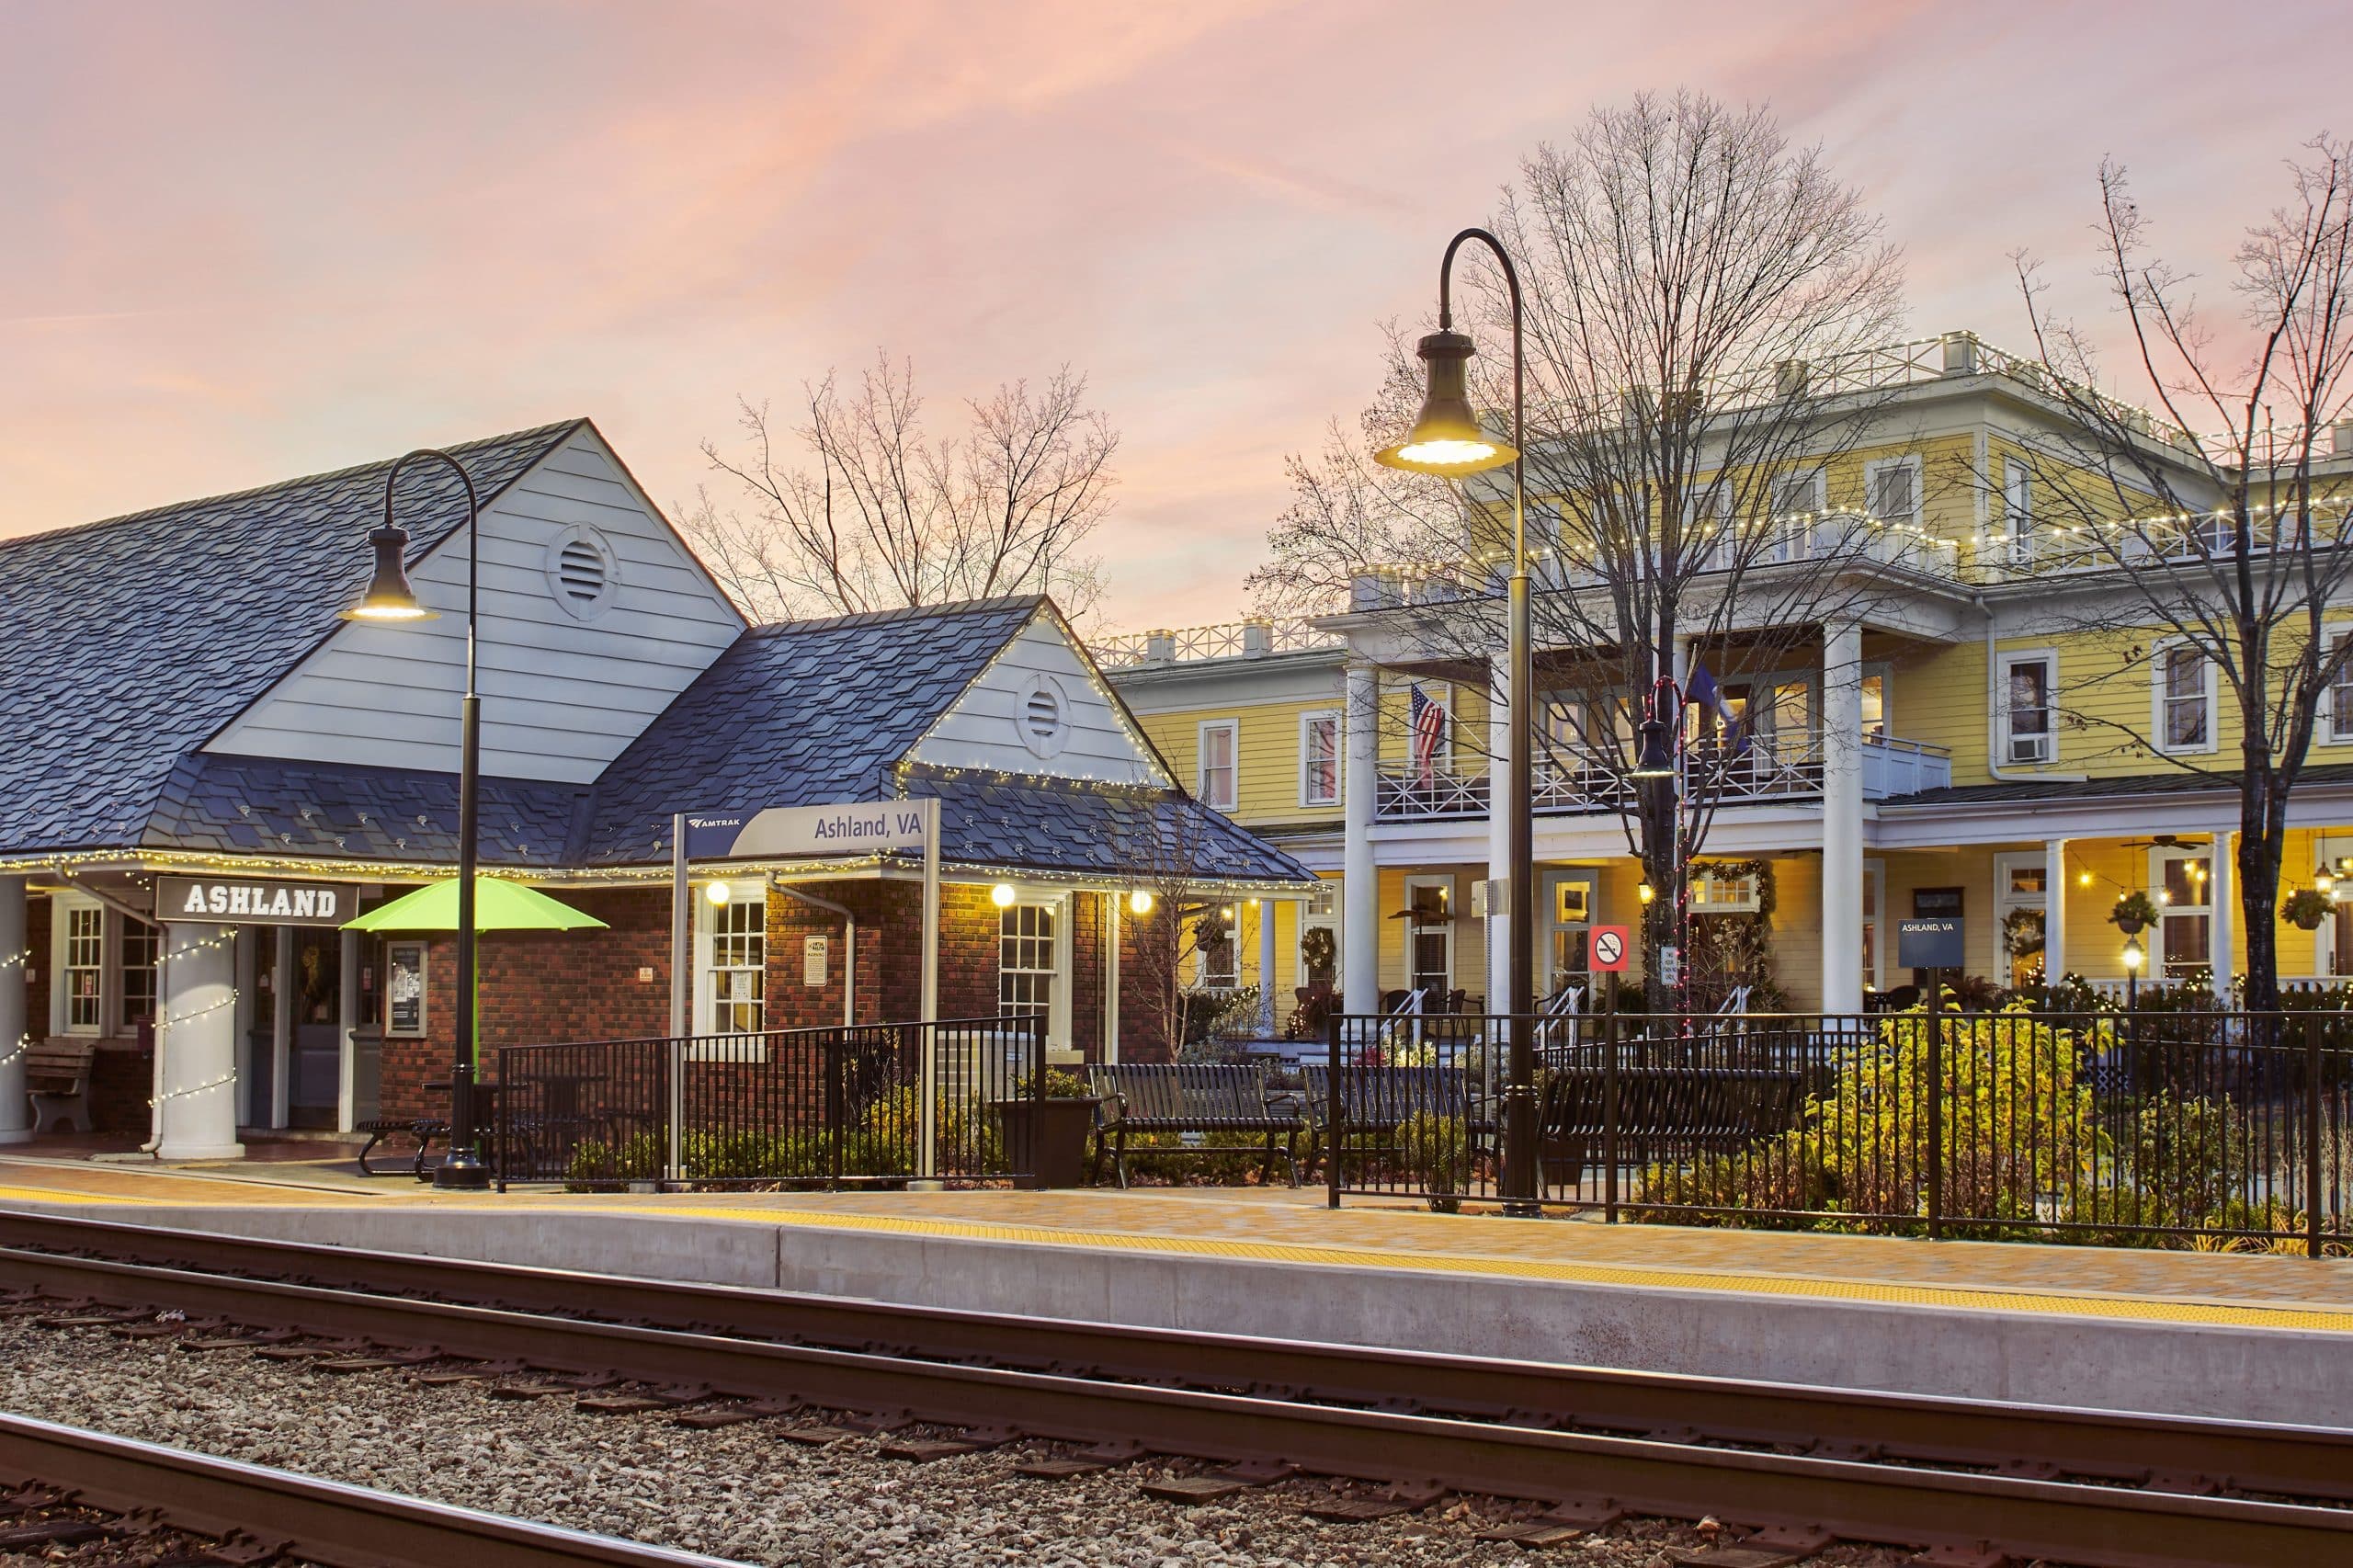 A pink sky covers Ashland, Virginia. Lights come on as the sun sets over Ashland's pretty downtown with the Amtrak train station and train tracks in the foreground. 